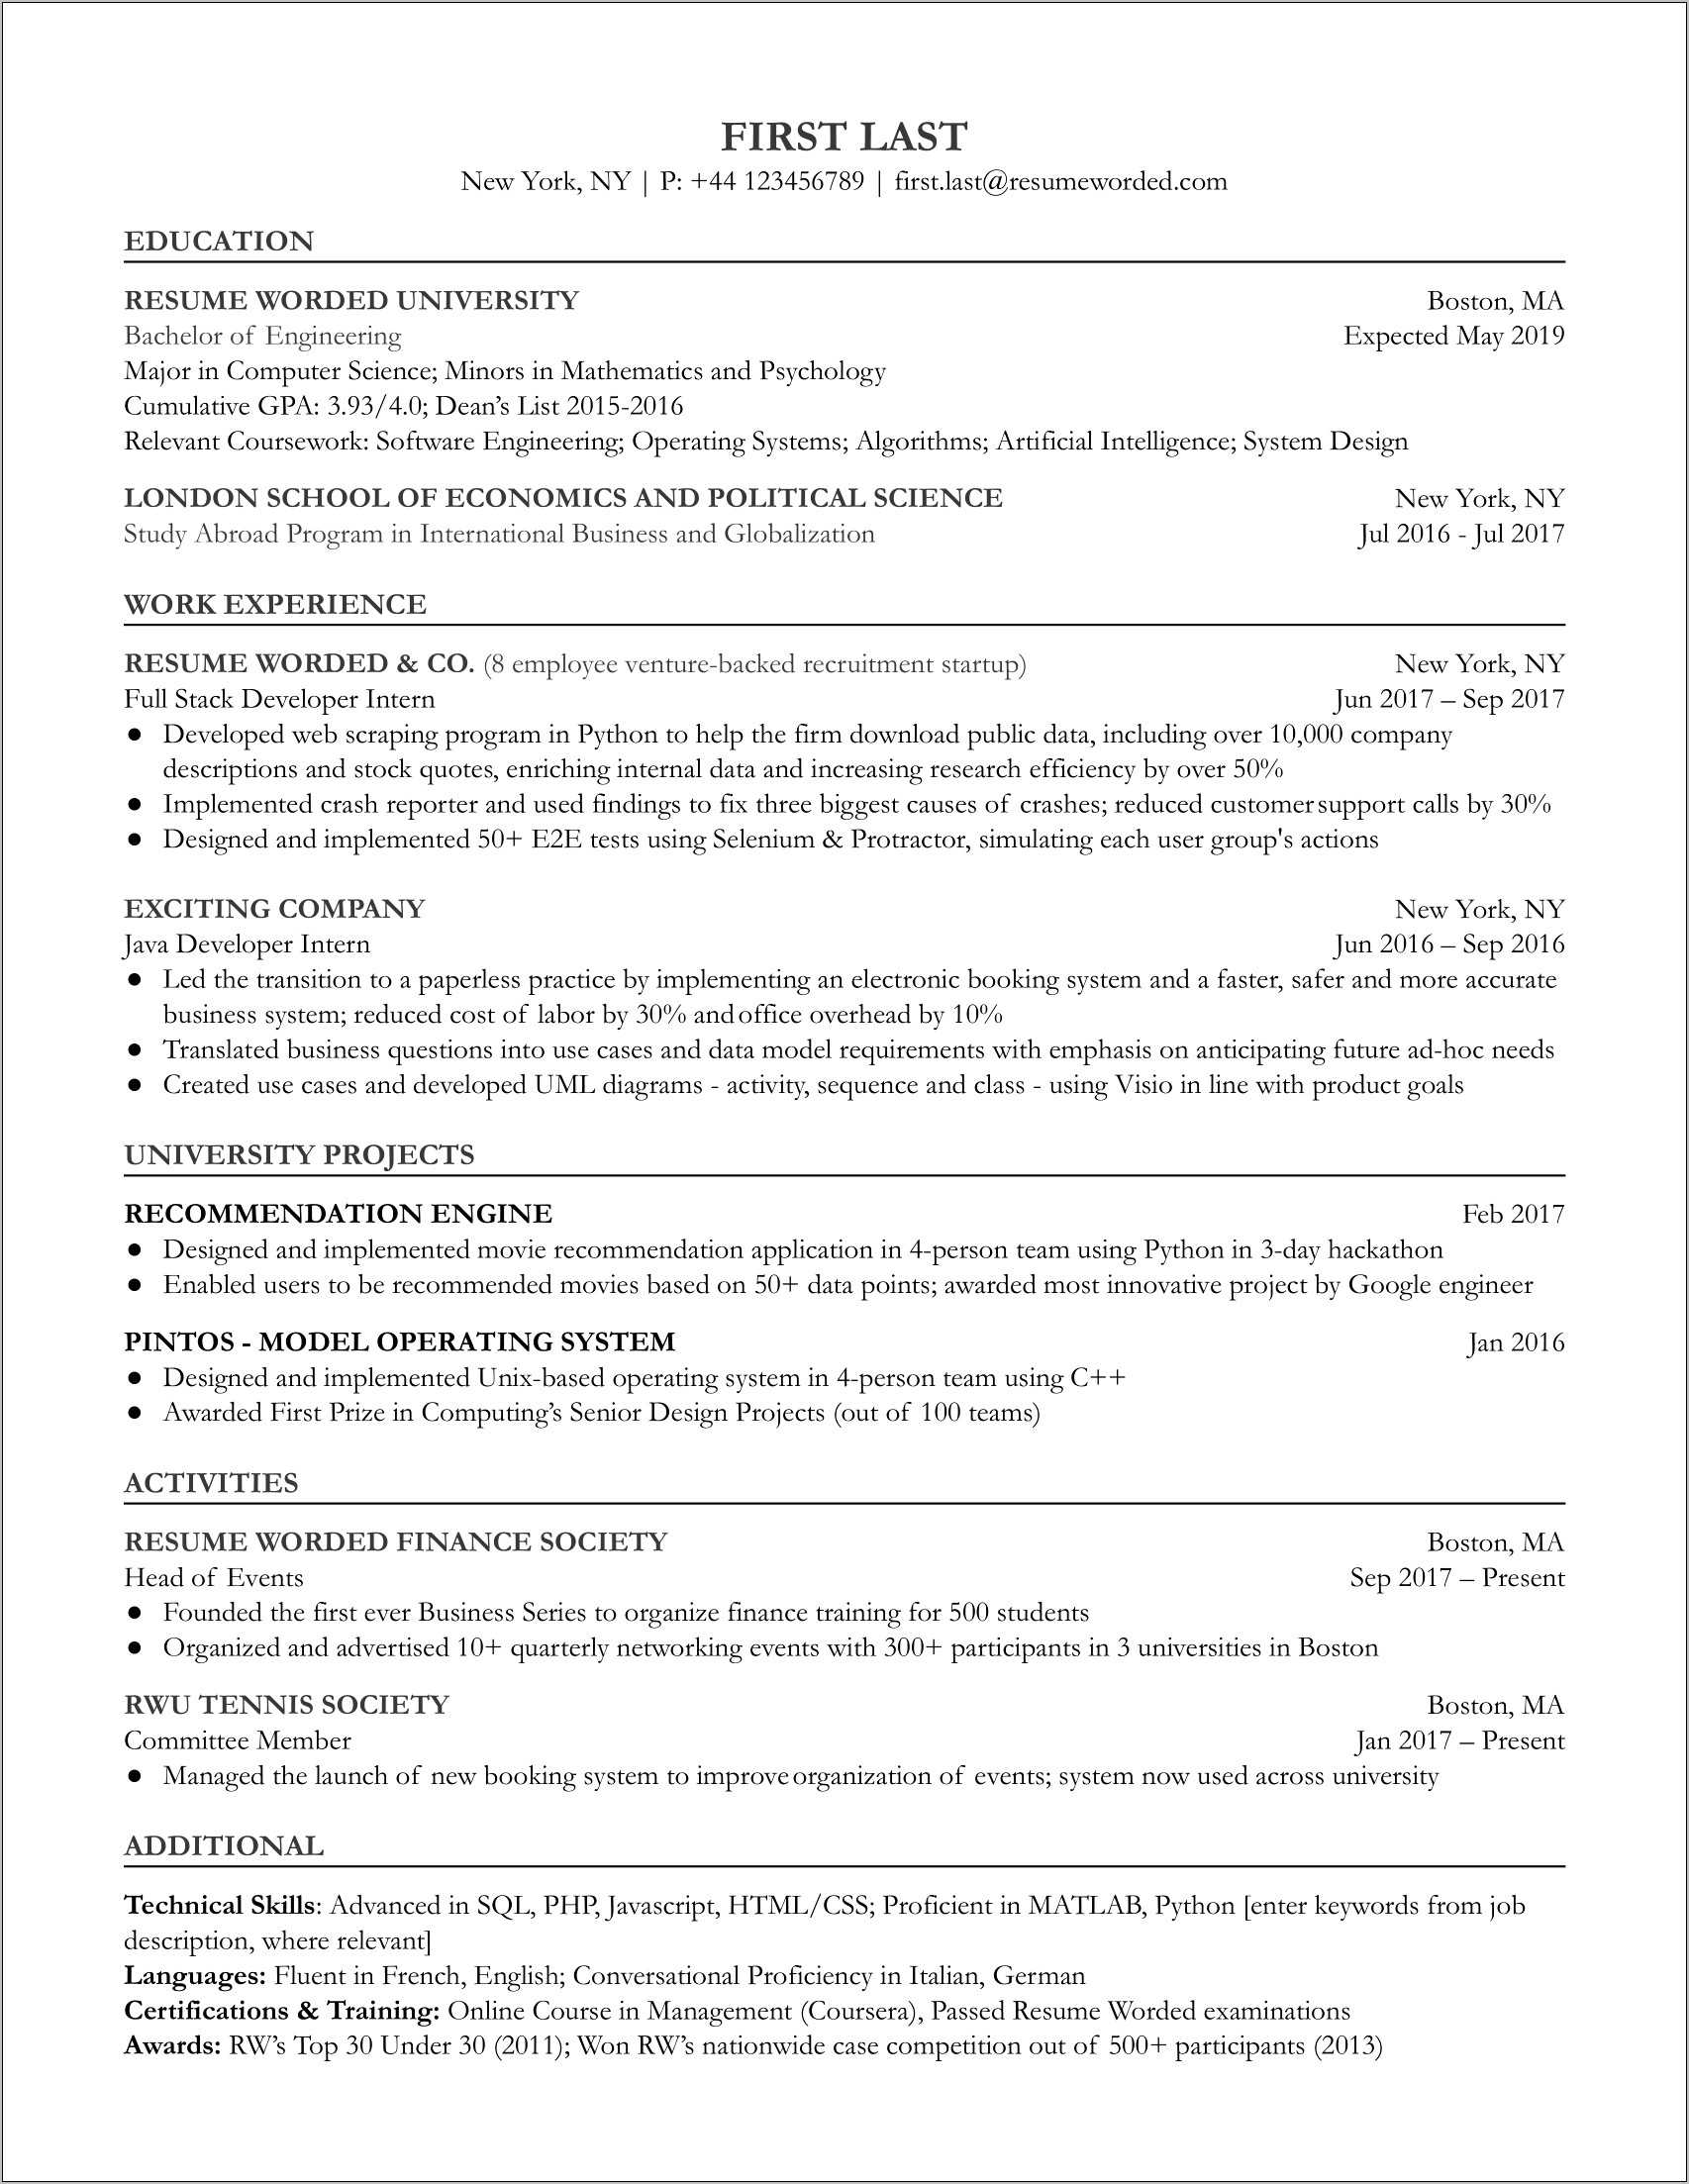 Transitional Resume Summary From Engineer To Cyber Security